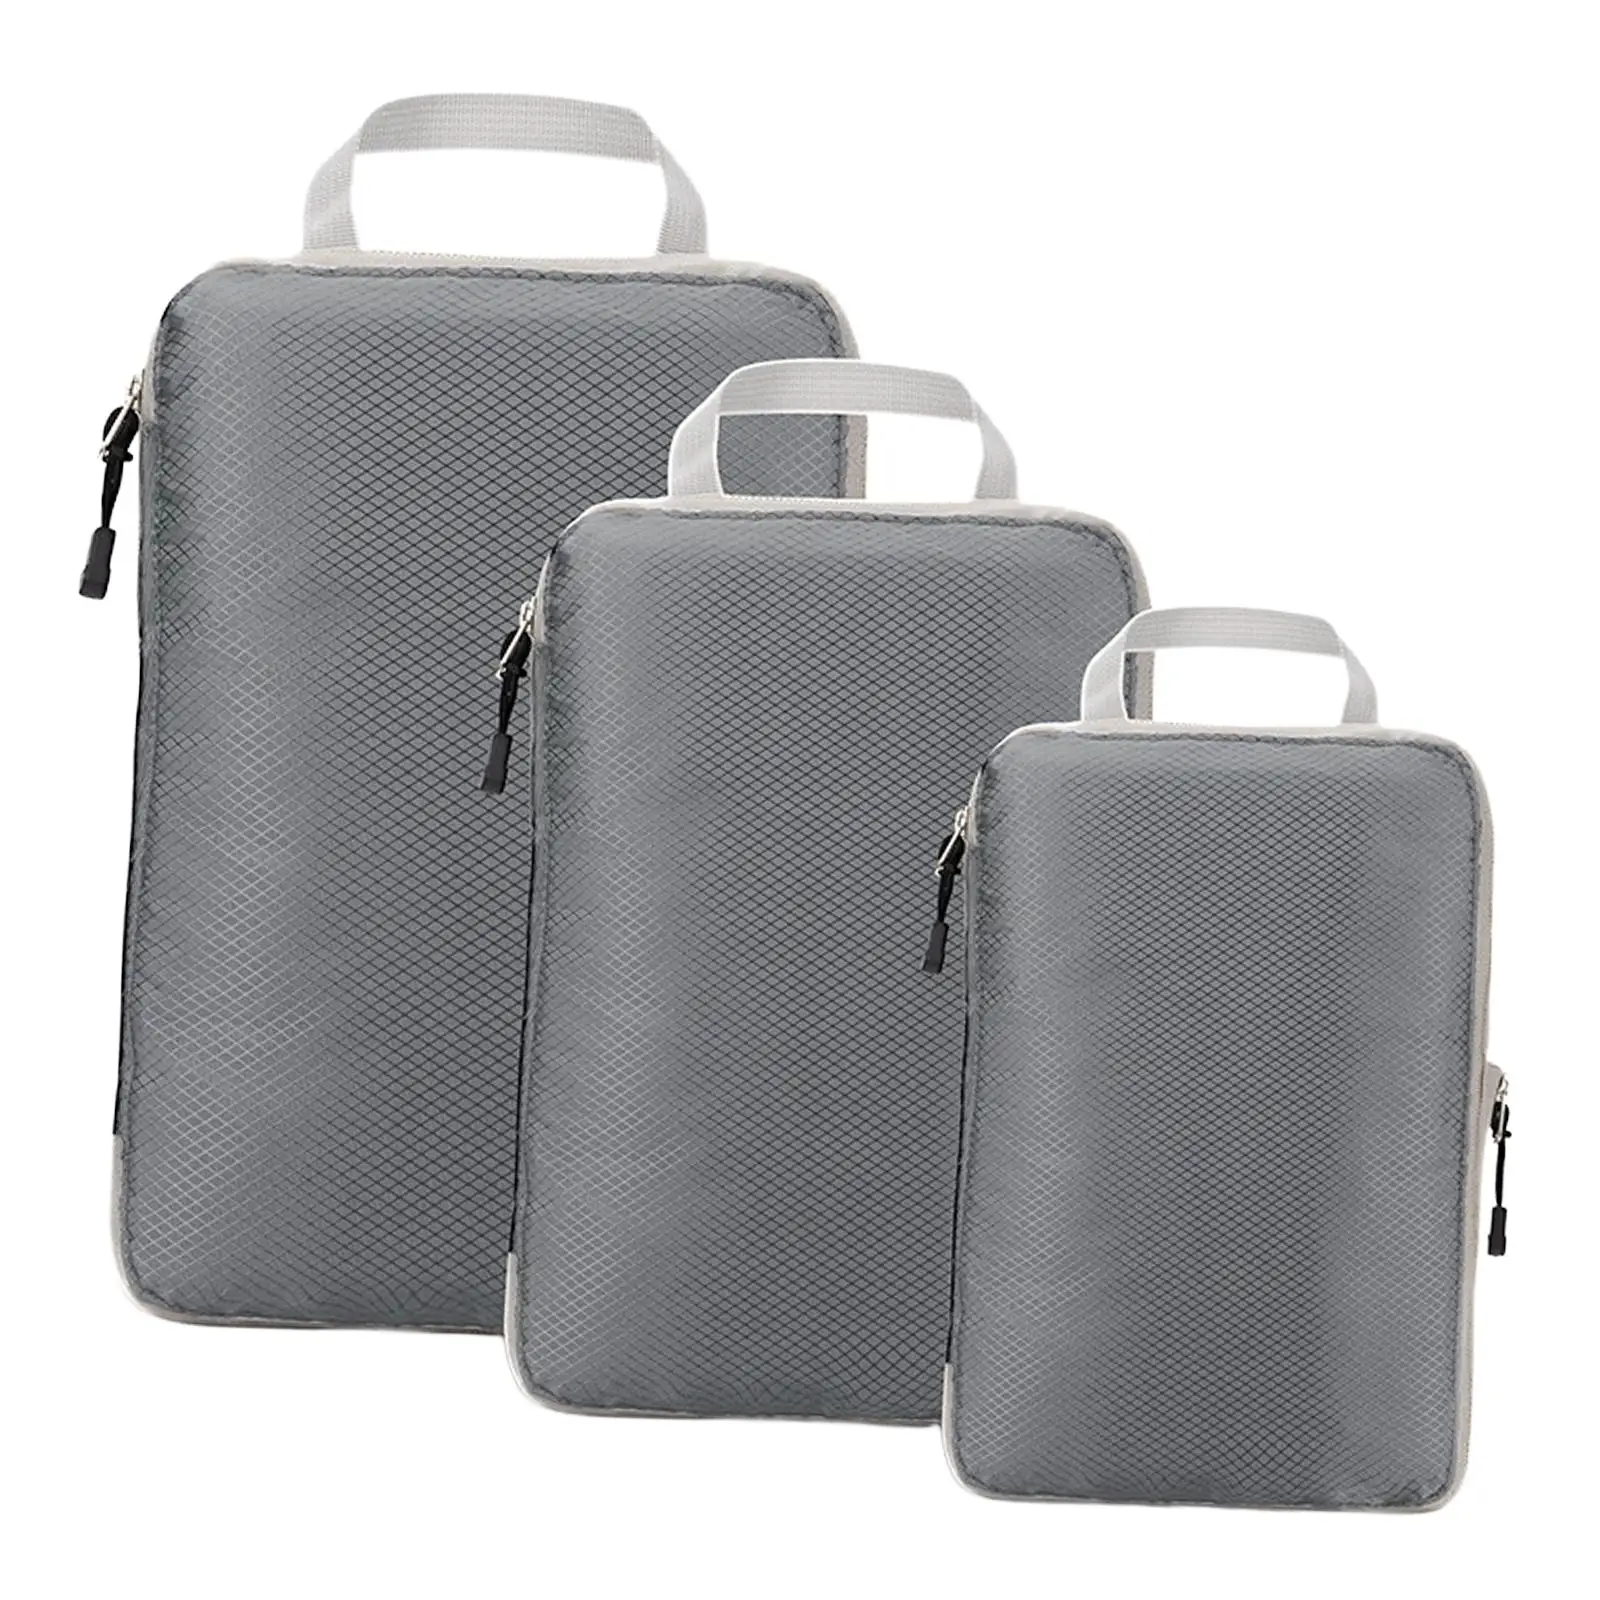 3Pcs Travel Compressible Packing Cubes Bags with Handbag Portable Luggage Organizers for Clothes Accessories Suitcases